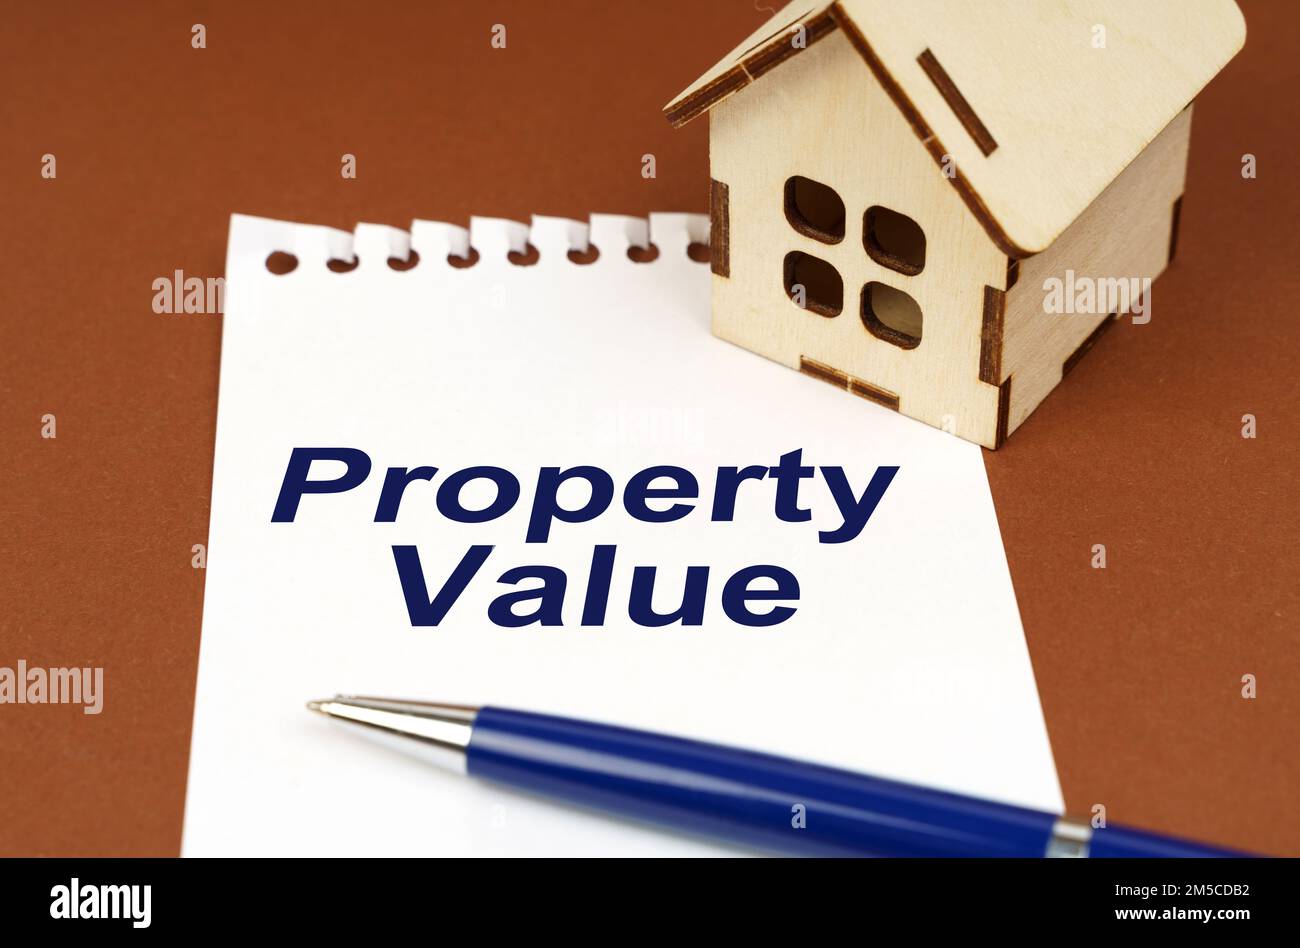 Business concept. On a brown surface is a house, a pen and a notepad with the inscription - Property Value Stock Photo